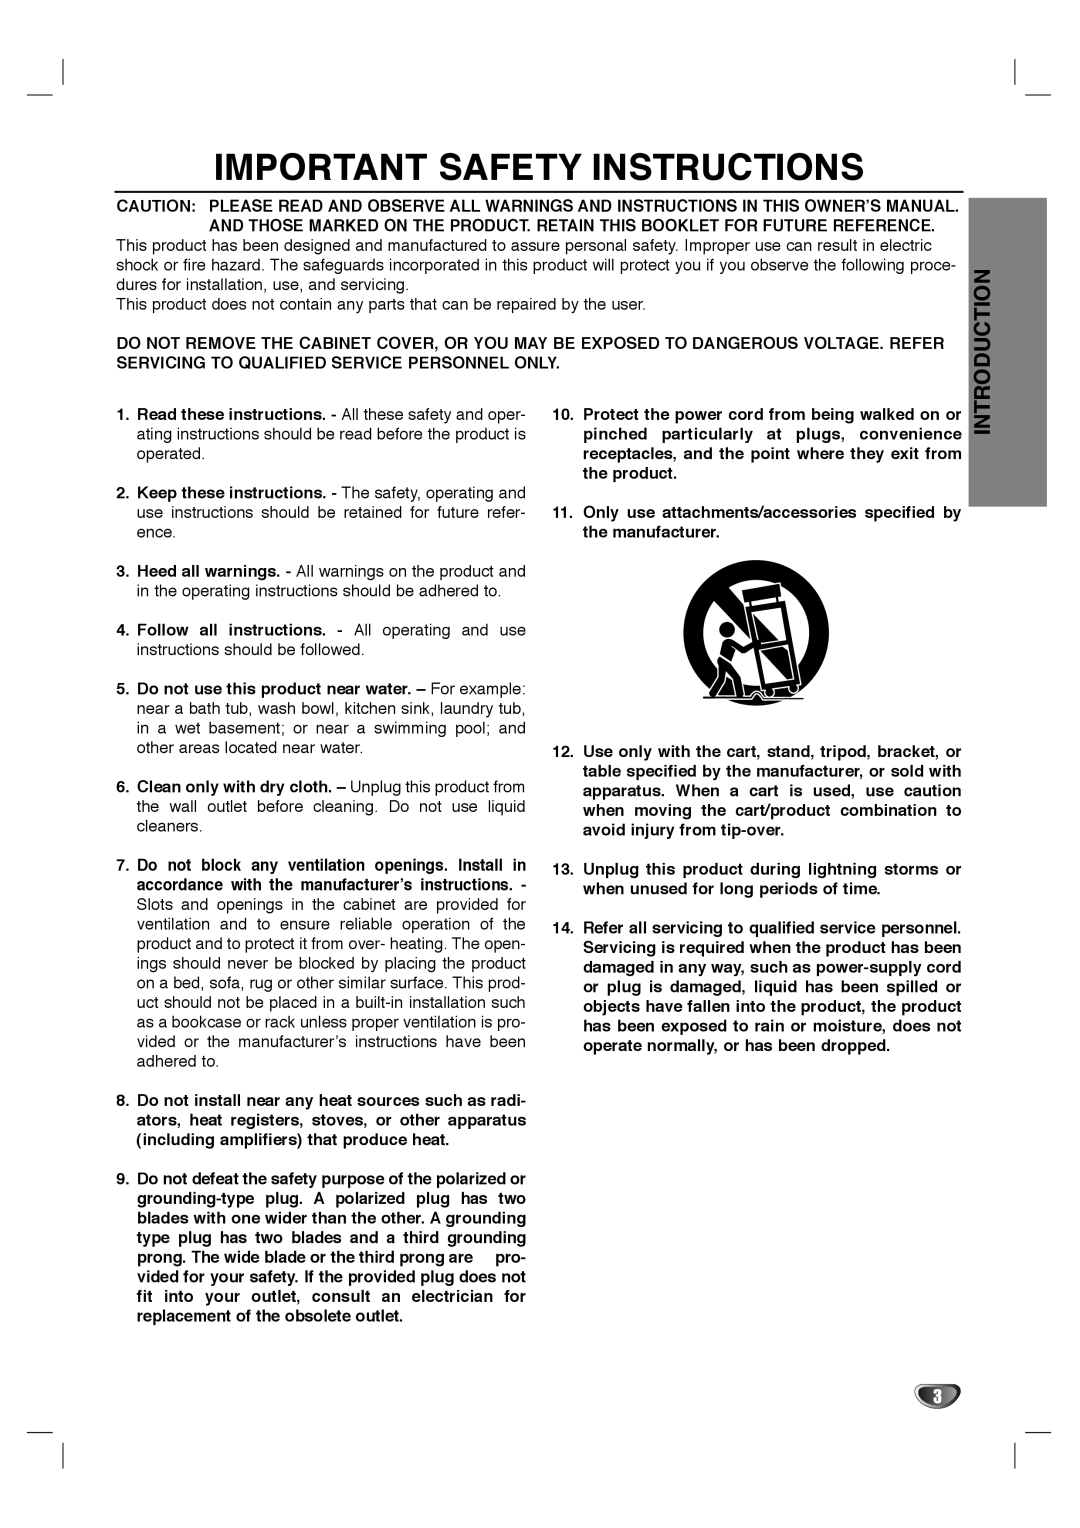 Sanyo SCP-2700 instruction manual Introduction, Important Safety Instructions 